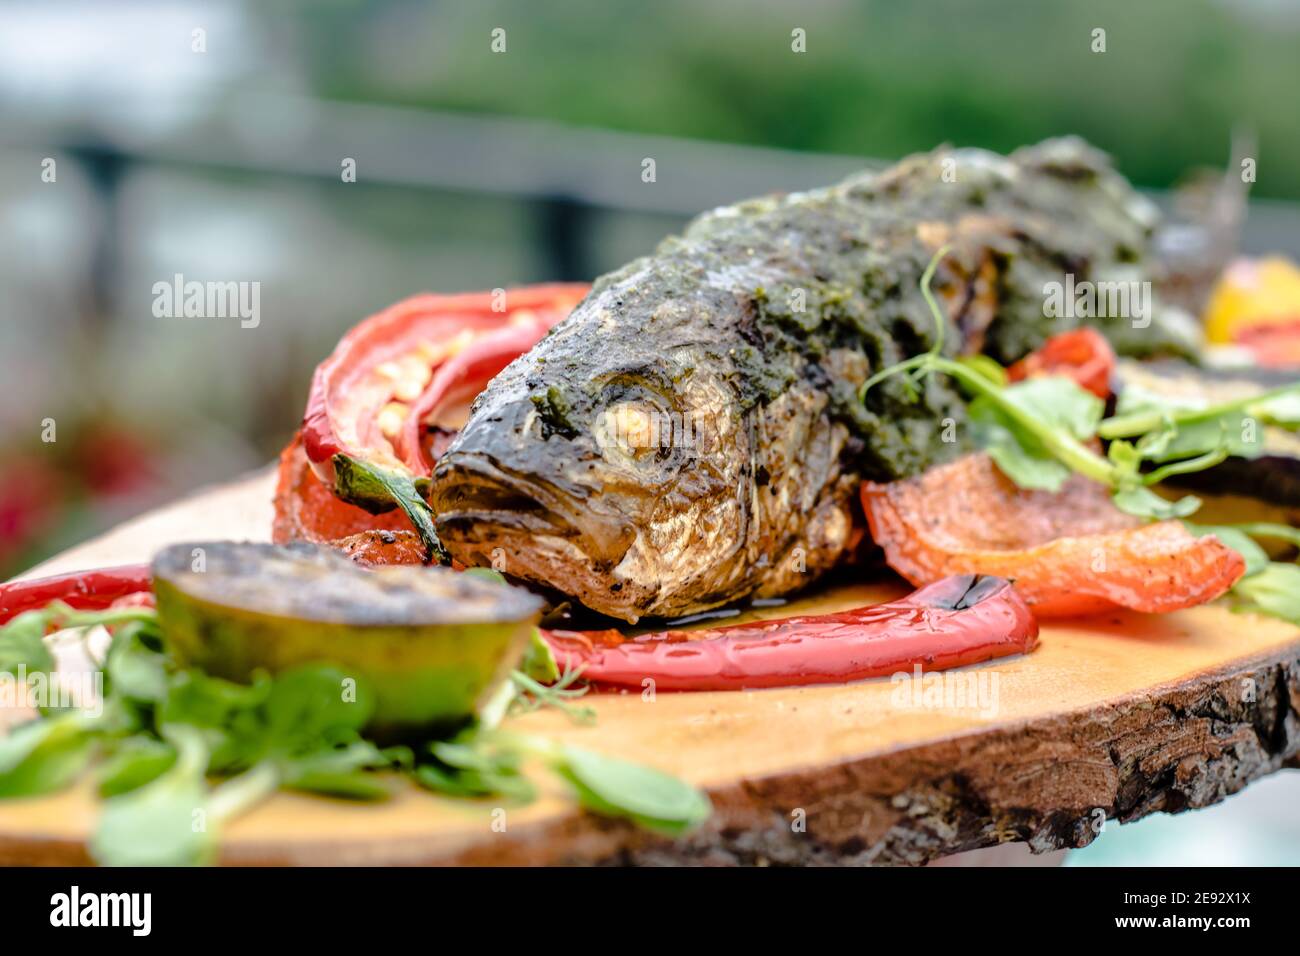 Fried fish on a wood plate at a restaurant Stock Photo